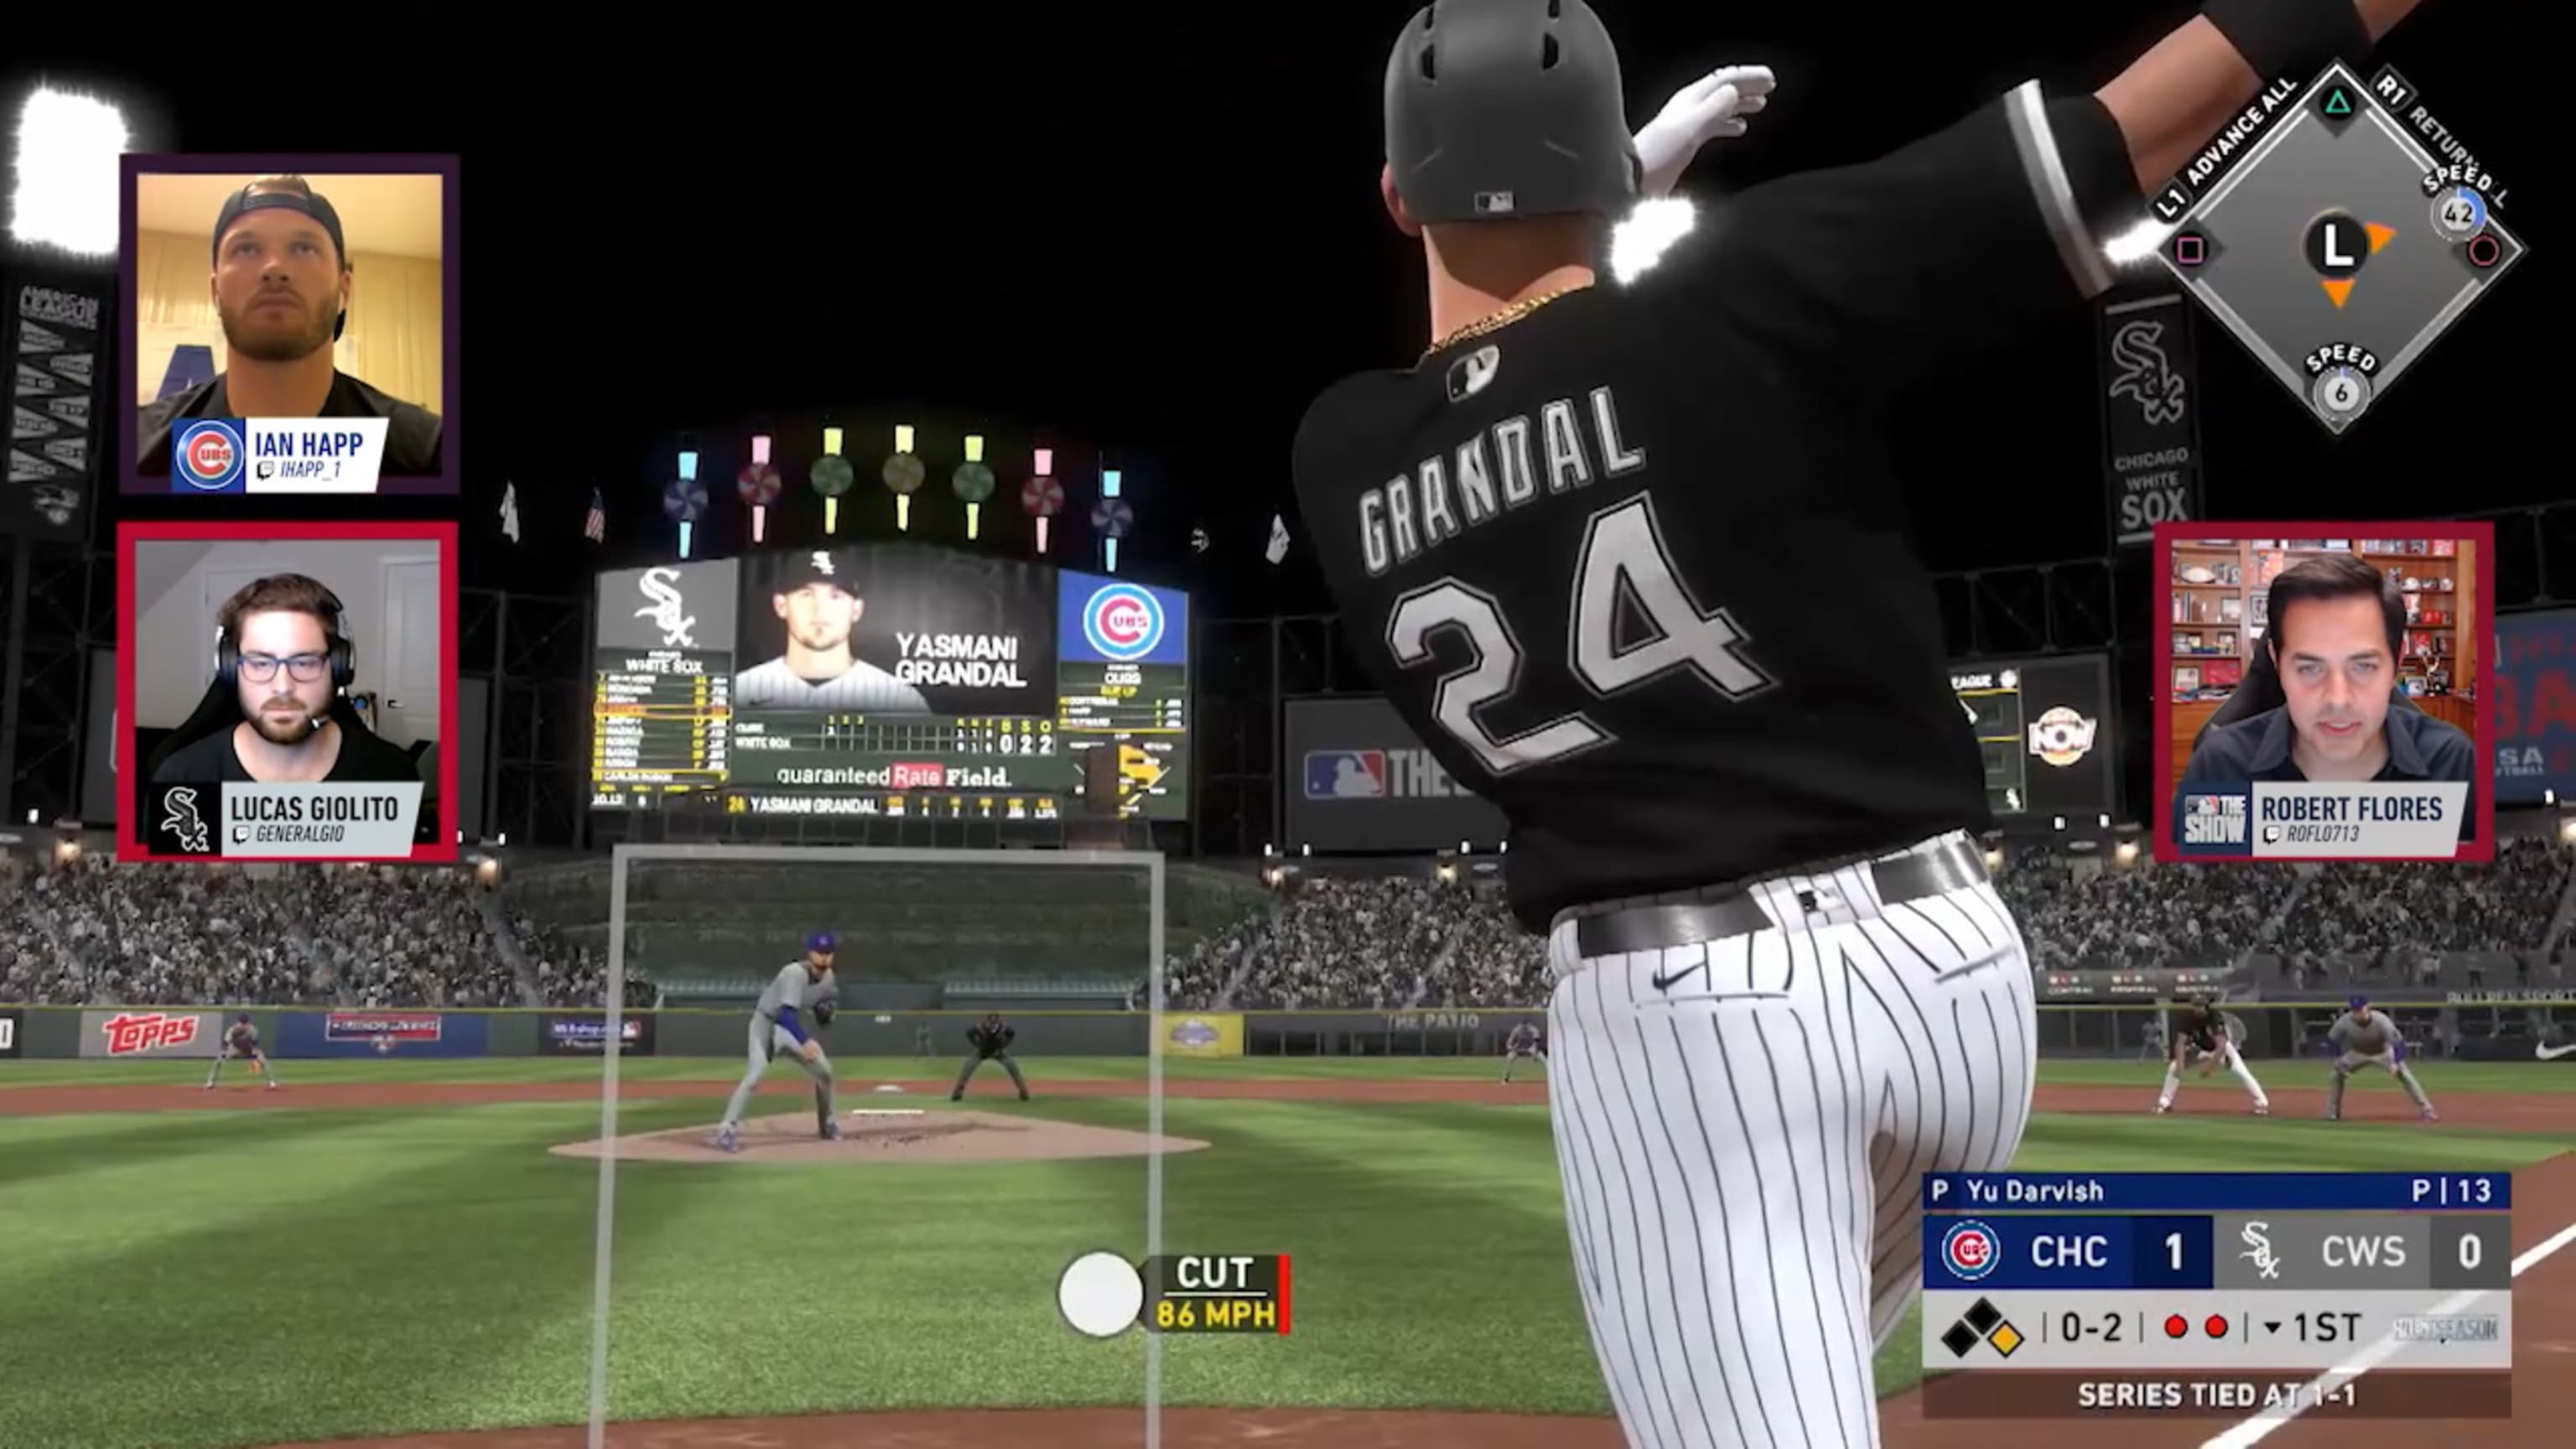 MLB The Show Players League